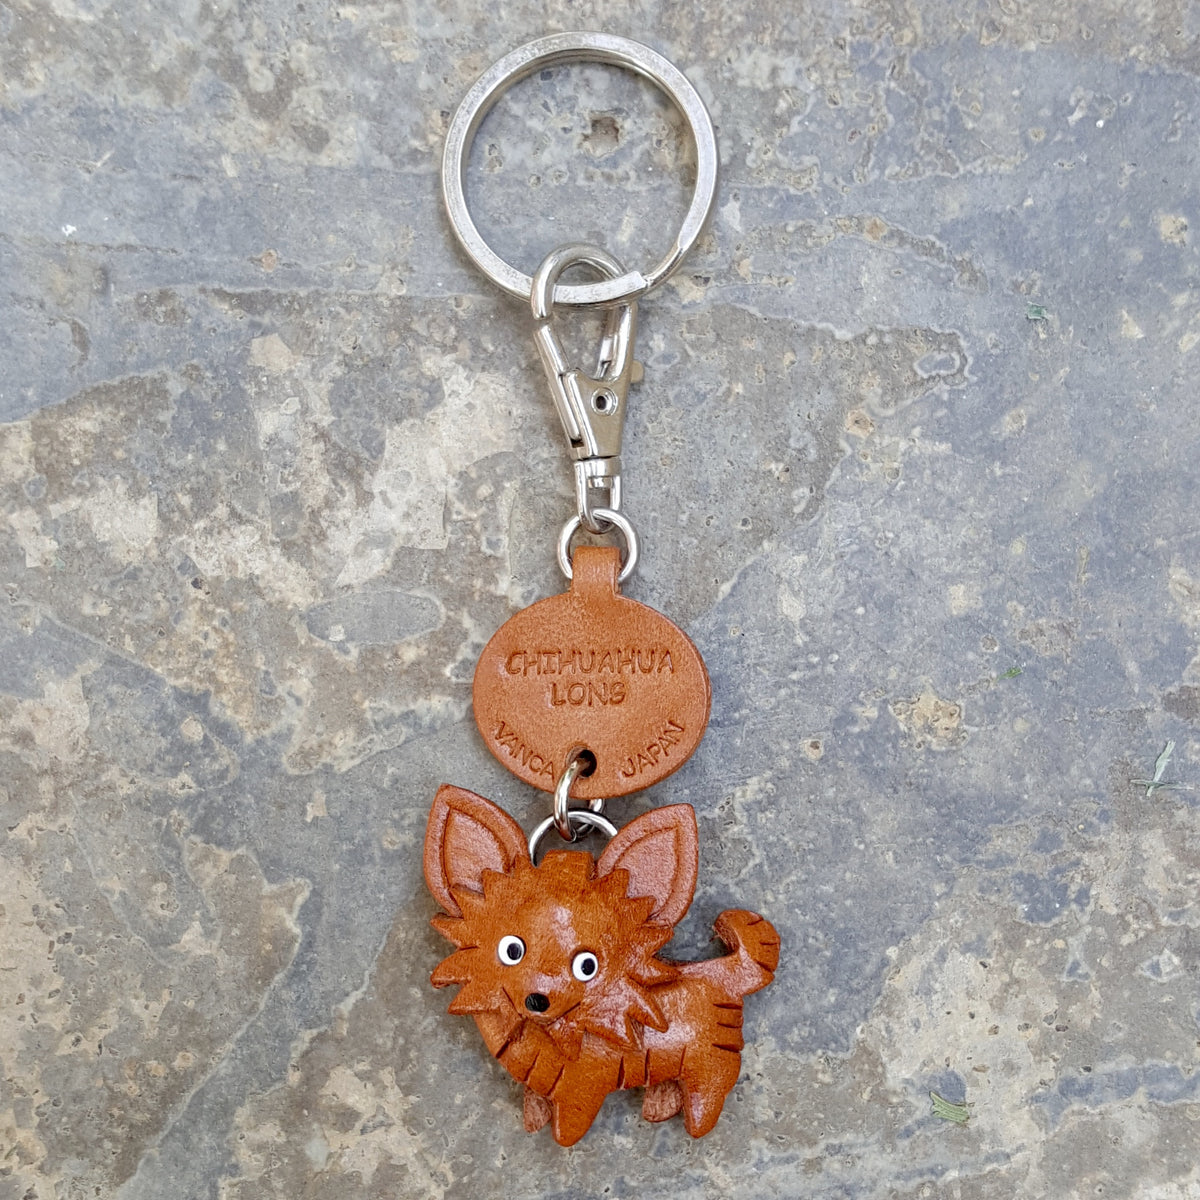 AIREDALE TERRIER KEYCHAIN